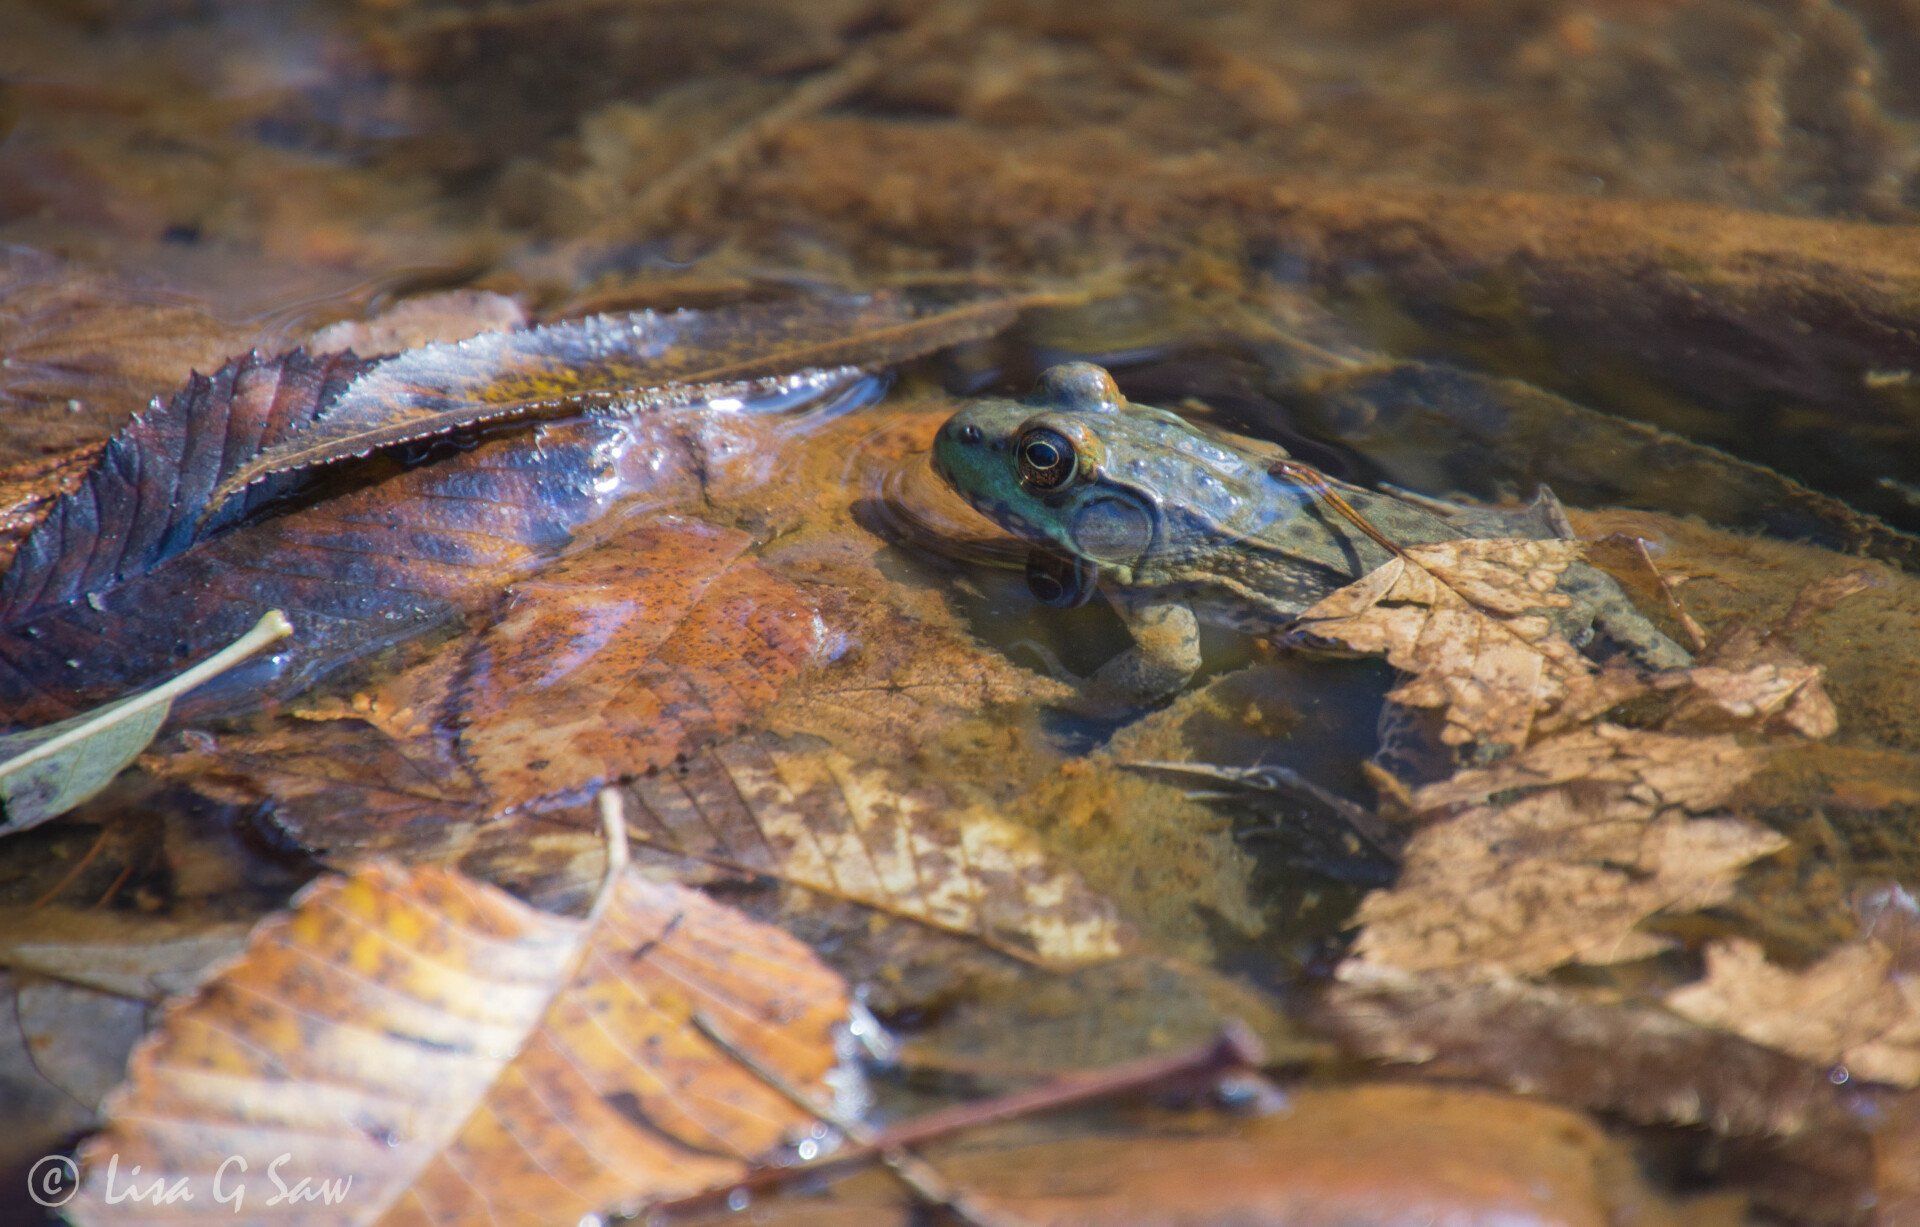 Toad in water surrounded by autumn leaves